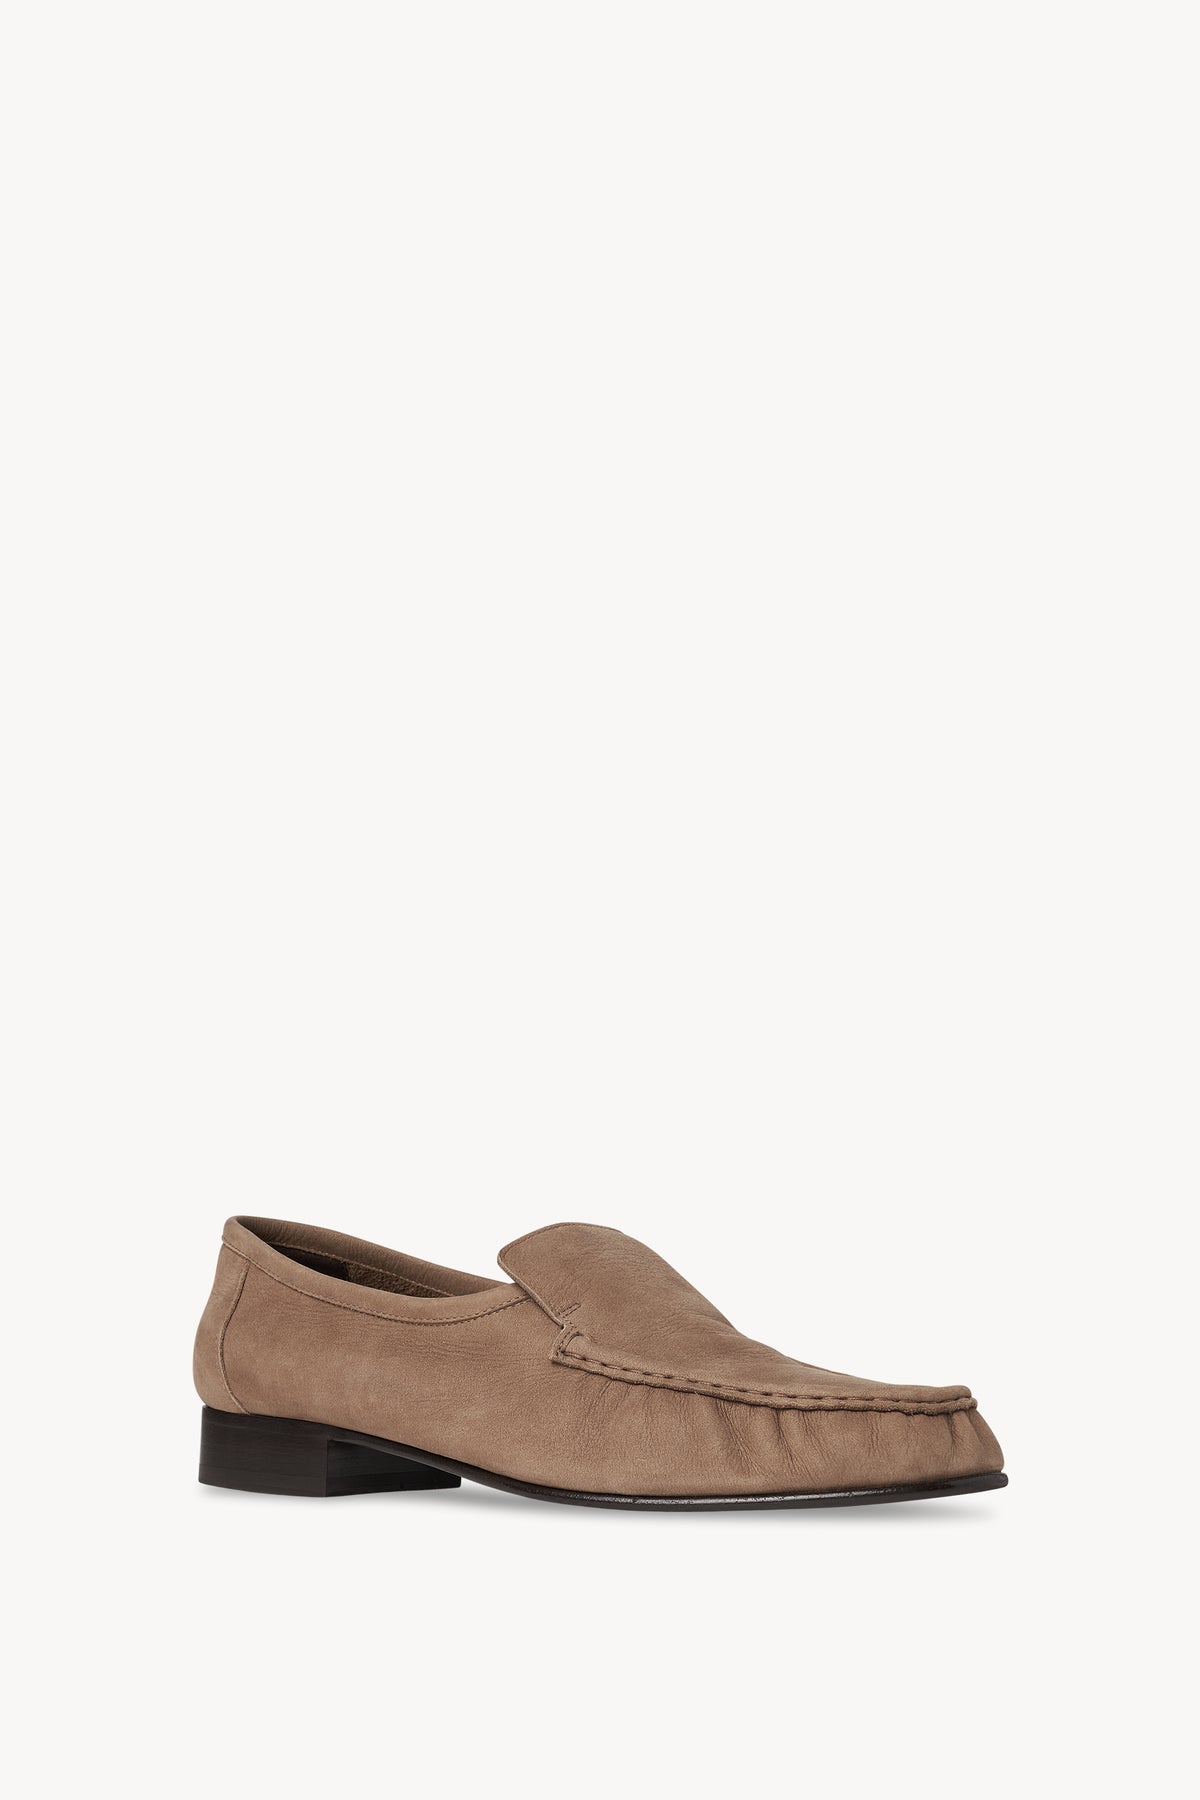 Emerson Loafer in Leather